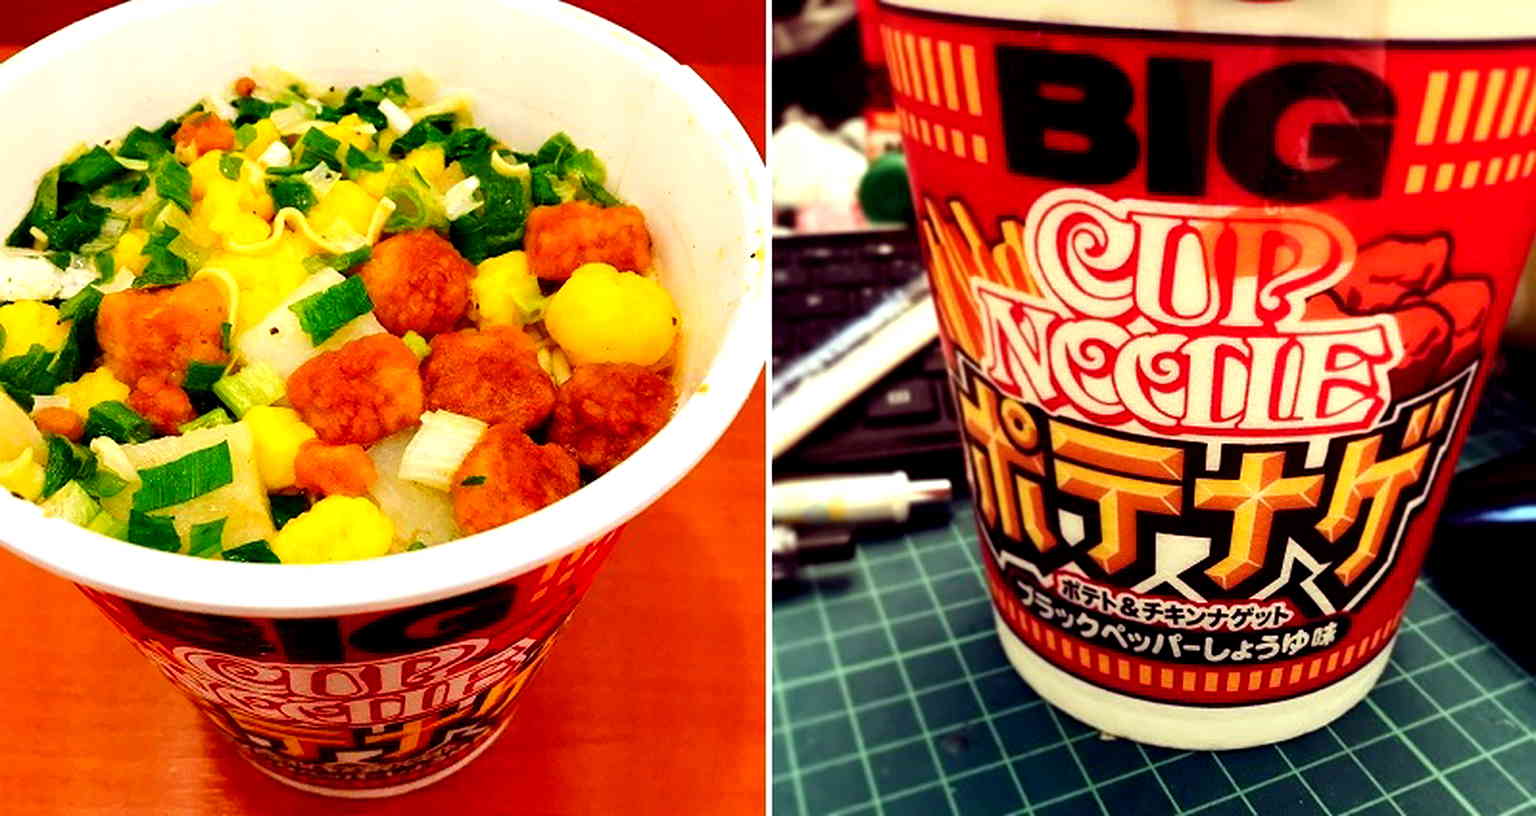 Cup Noodles Now Has Chicken Nugget and French Fry Ramen